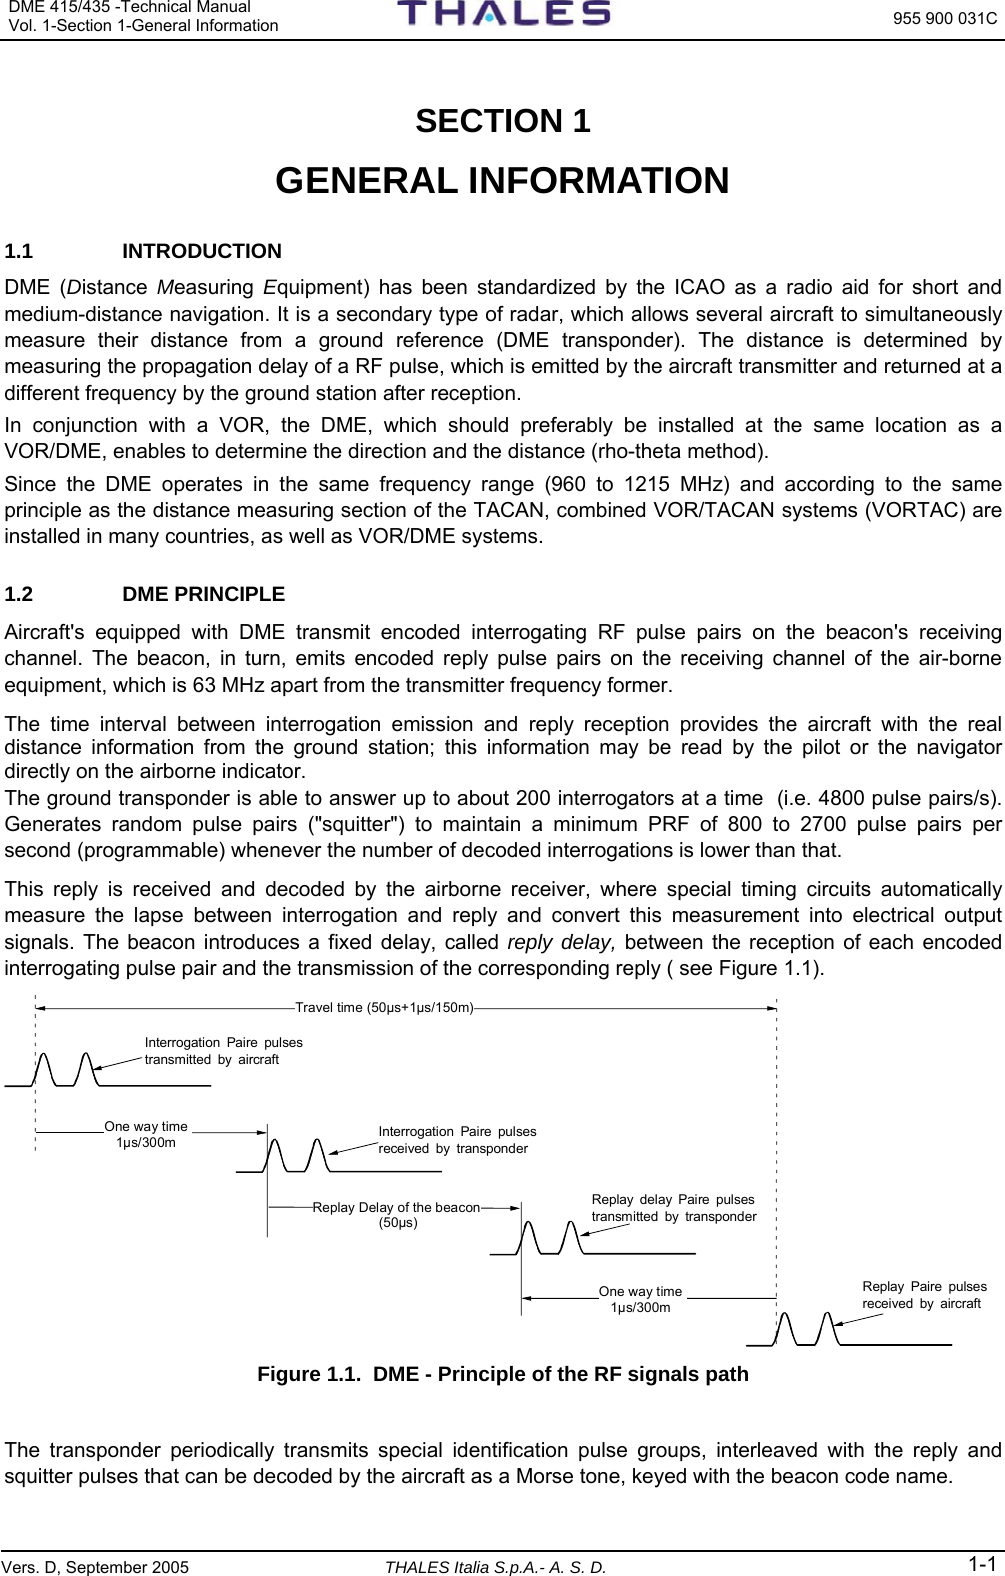 DME 415/435 -Technical Manual Vol. 1-Section 1-General Information  955 900 031C Vers. D, September 2005 THALES Italia S.p.A.- A. S. D. 1-1  SECTION 1   GENERAL INFORMATION 1.1 INTRODUCTION DME (Distance  Measuring  Equipment) has been standardized by the ICAO as a radio aid for short and medium-distance navigation. It is a secondary type of radar, which allows several aircraft to simultaneously measure their distance from a ground reference (DME transponder). The distance is determined by measuring the propagation delay of a RF pulse, which is emitted by the aircraft transmitter and returned at a different frequency by the ground station after reception.  In conjunction with a VOR, the DME, which should preferably be installed at the same location as a VOR/DME, enables to determine the direction and the distance (rho-theta method).  Since the DME operates in the same frequency range (960 to 1215 MHz) and according to the same principle as the distance measuring section of the TACAN, combined VOR/TACAN systems (VORTAC) are installed in many countries, as well as VOR/DME systems. 1.2 DME PRINCIPLE Aircraft&apos;s equipped with DME transmit encoded interrogating RF pulse pairs on the beacon&apos;s receiving channel. The beacon, in turn, emits encoded reply pulse pairs on the receiving channel of the air-borne equipment, which is 63 MHz apart from the transmitter frequency former. The time interval between interrogation emission and reply reception provides the aircraft with the real distance information from the ground station; this information may be read by the pilot or the navigator directly on the airborne indicator. The ground transponder is able to answer up to about 200 interrogators at a time  (i.e. 4800 pulse pairs/s). Generates random pulse pairs (&quot;squitter&quot;) to maintain a minimum PRF of 800 to 2700 pulse pairs per second (programmable) whenever the number of decoded interrogations is lower than that. This reply is received and decoded by the airborne receiver, where special timing circuits automatically measure the lapse between interrogation and reply and convert this measurement into electrical output signals. The beacon introduces a fixed delay, called reply delay, between the reception of each encoded interrogating pulse pair and the transmission of the corresponding reply ( see Figure 1.1). Travel time (50µs+1µs/150m)Interrogation Paire pulses transmitted by aircraftOne way time 1µs/300mReplay Delay of the beacon (50µs)One way time 1µs/300mInterrogation Paire pulses received by transponderReplay delay Paire pulses transmitted by transponderReplay Paire pulses received by aircraft Figure 1.1.  DME - Principle of the RF signals path  The transponder periodically transmits special identification pulse groups, interleaved with the reply and squitter pulses that can be decoded by the aircraft as a Morse tone, keyed with the beacon code name. 